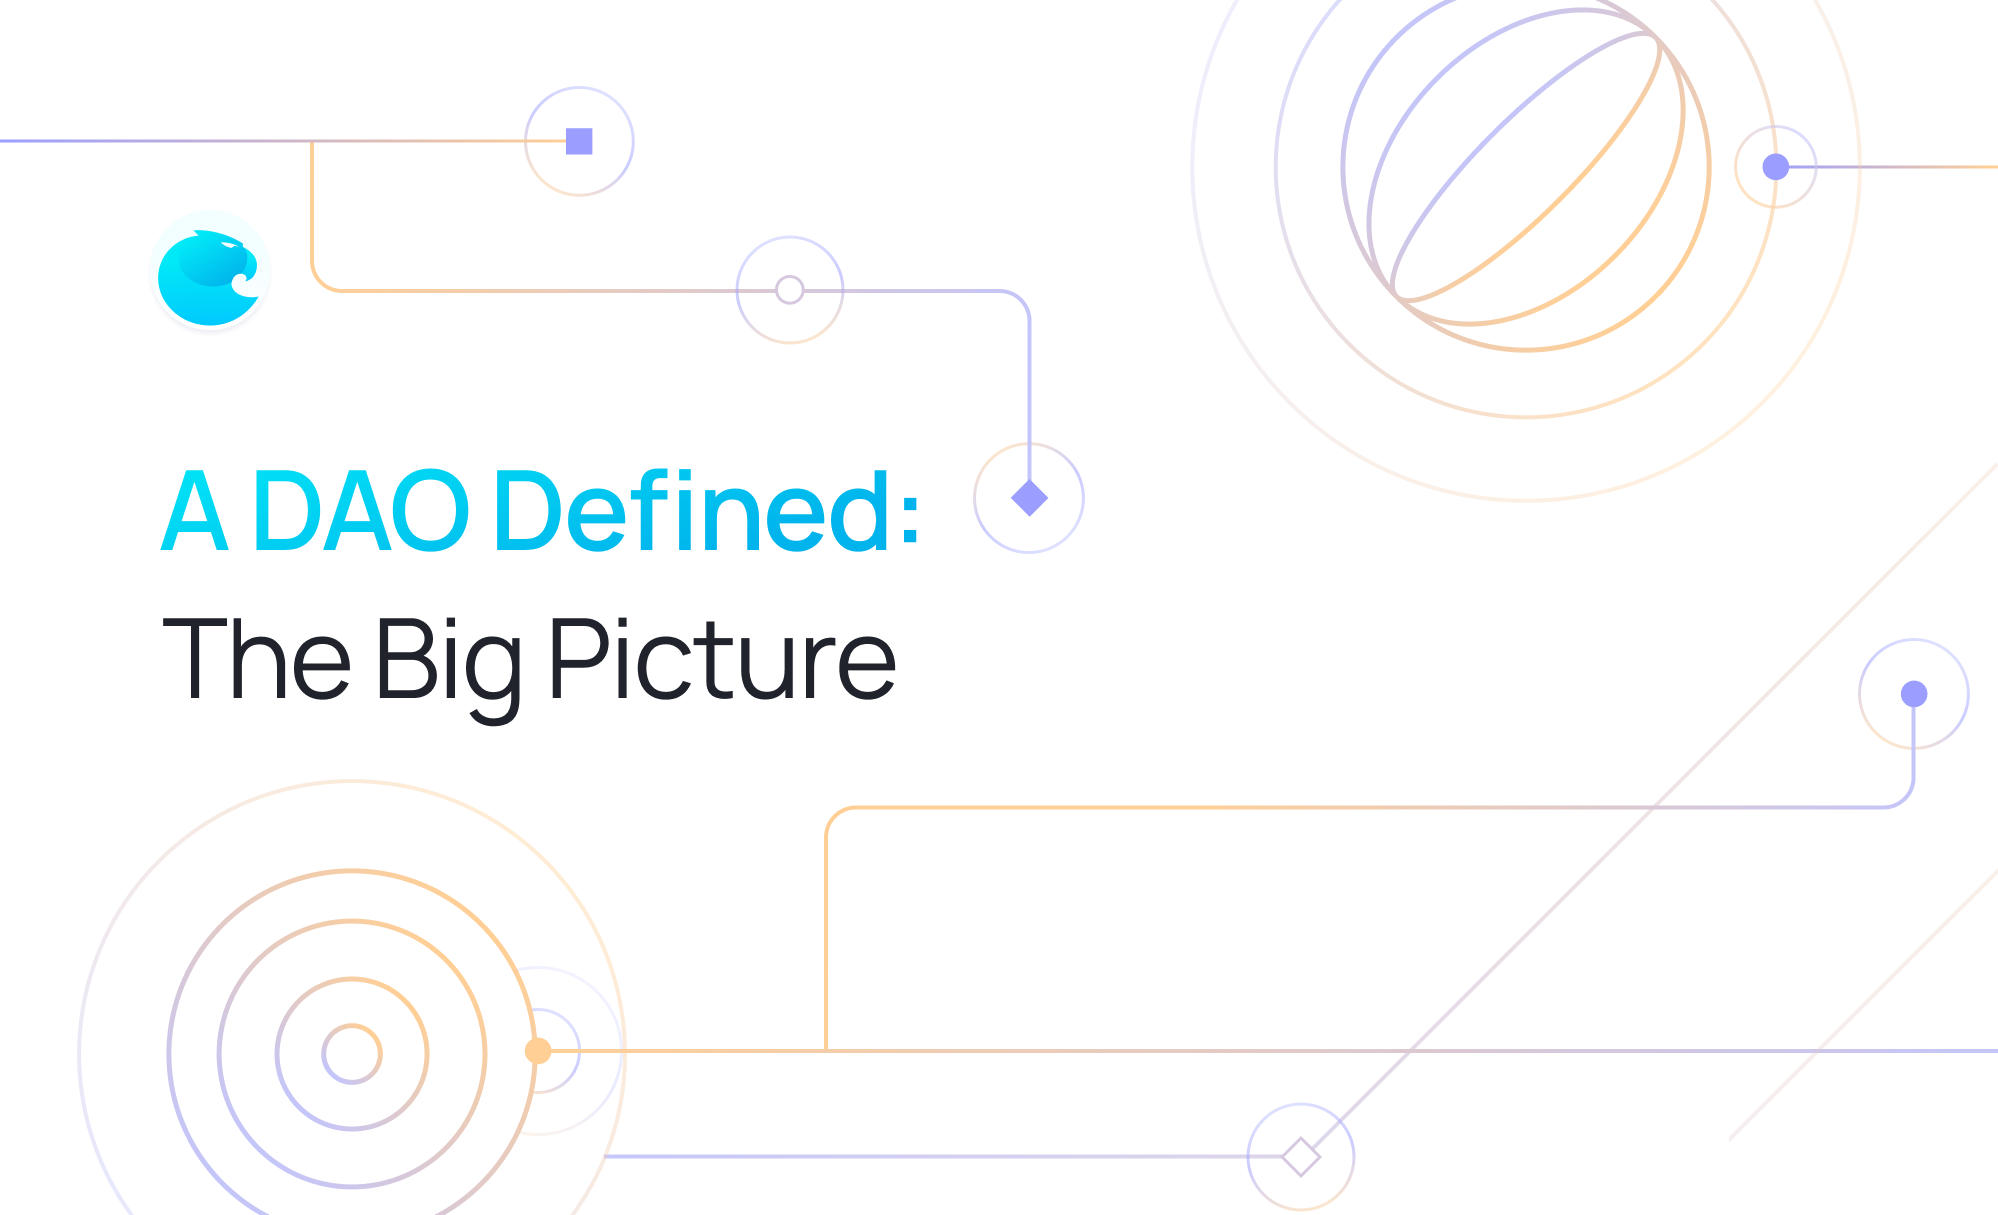 A DAO Defined: The Big Picture